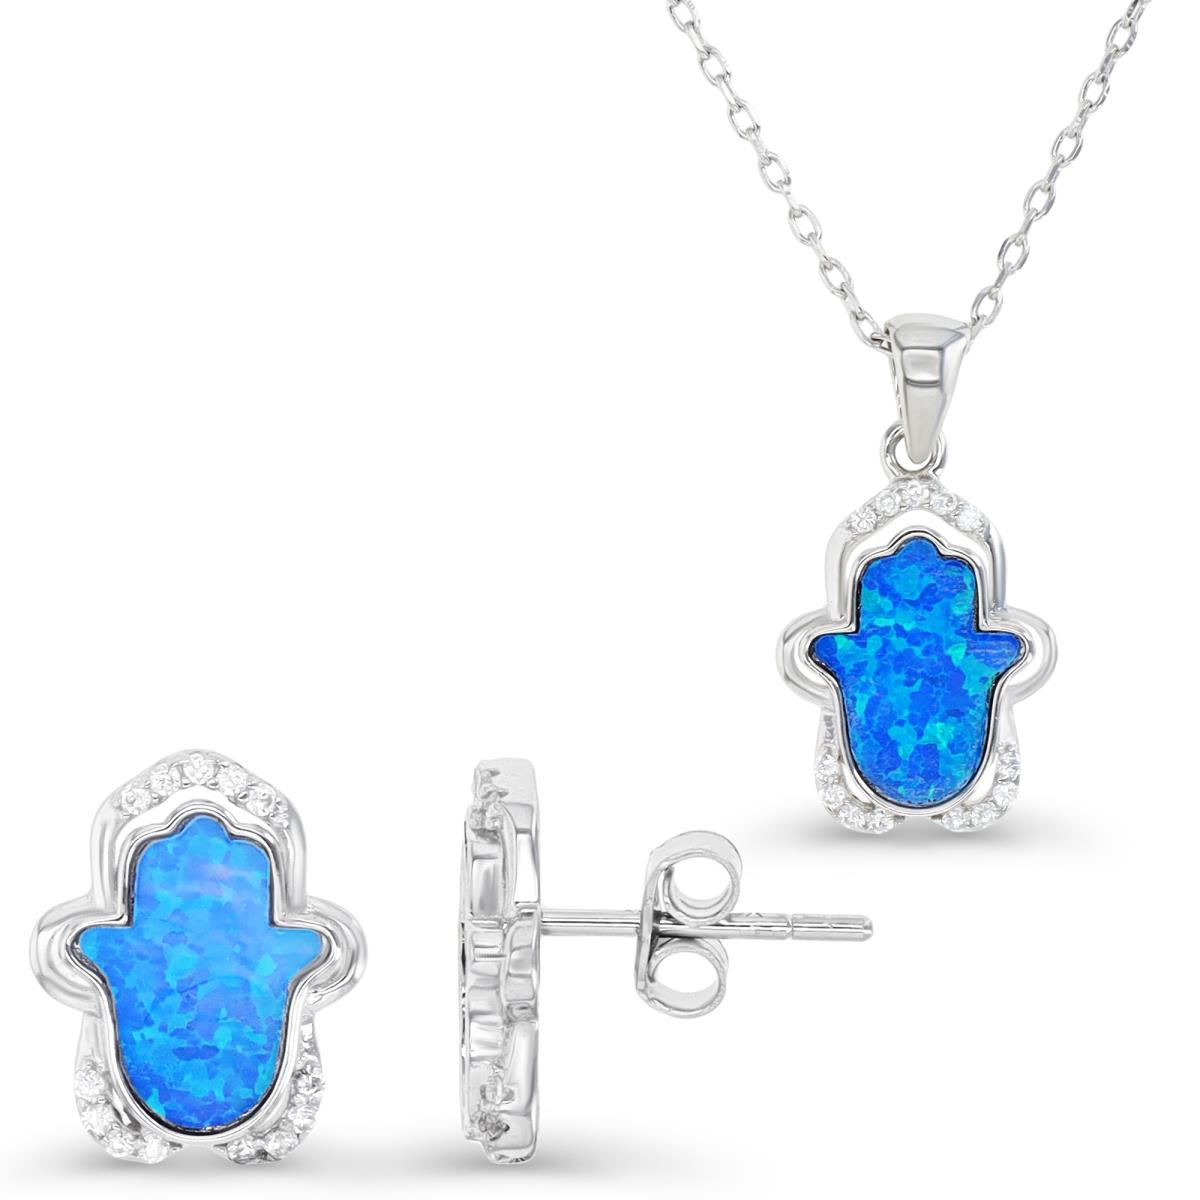 Sterling Silver Rhodium & Cr. Blue Opal and White CZ Hamsa Earrings and Necklace Set